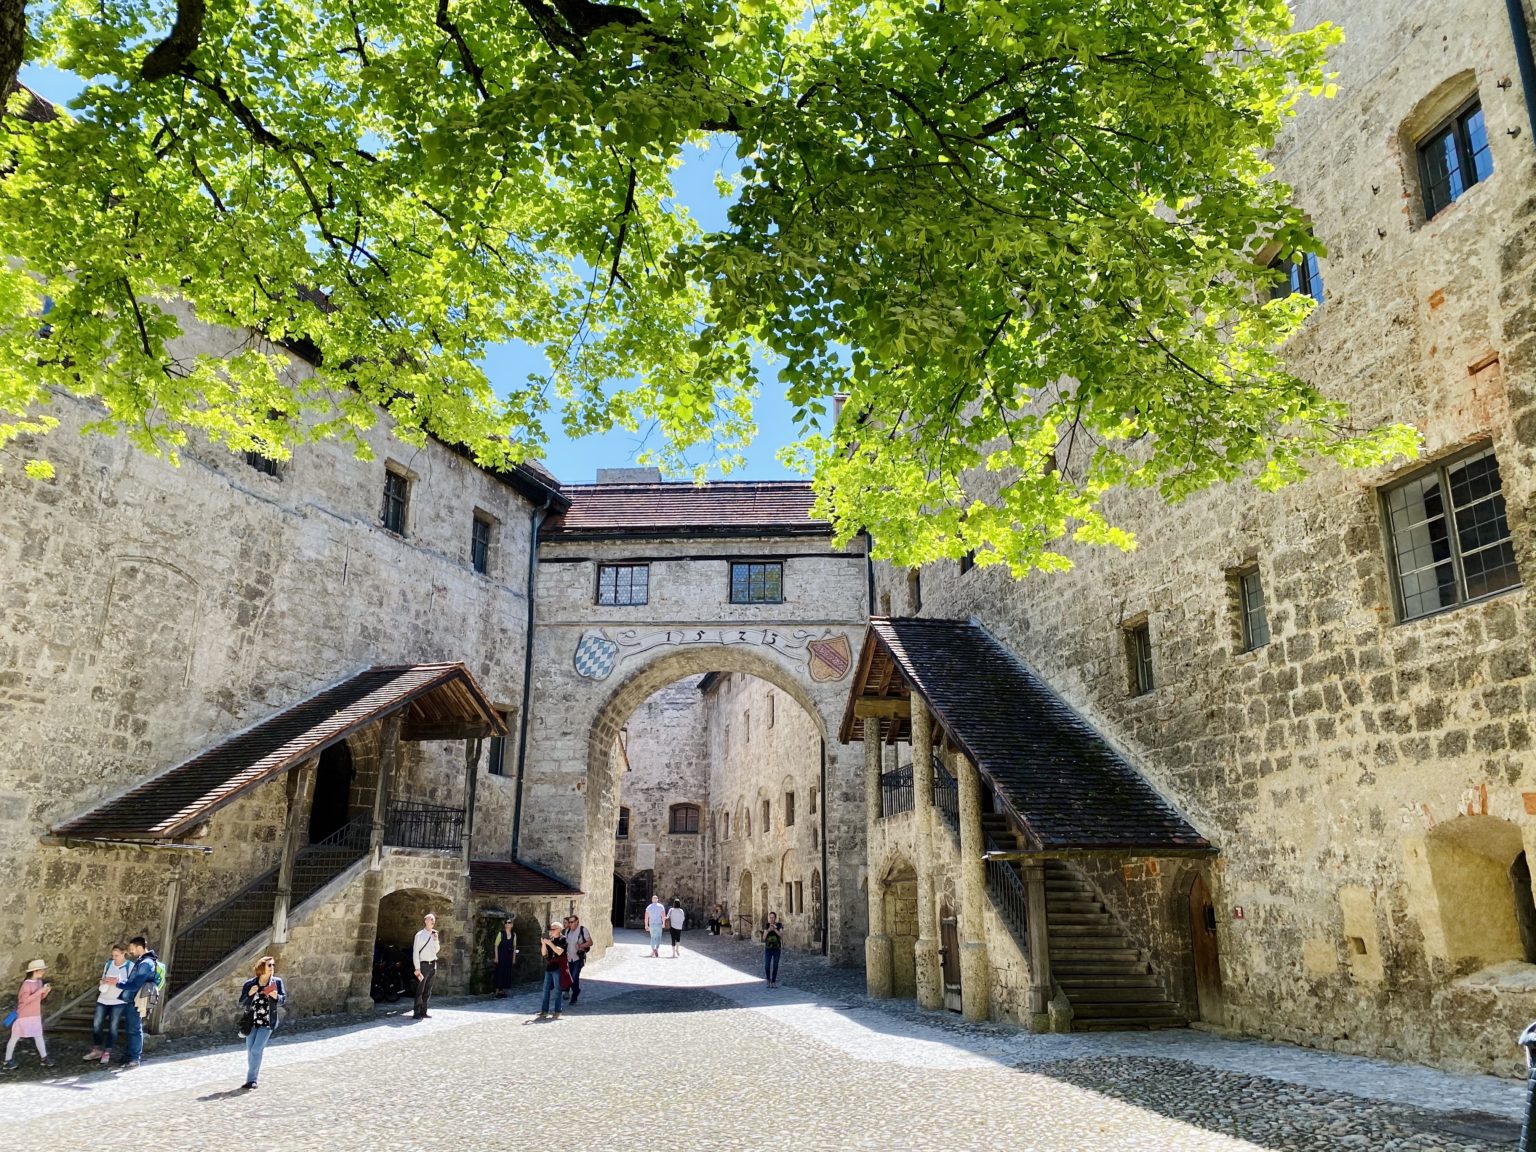 Why Burghausen Castle Should Be On Your German Travel Bucket List